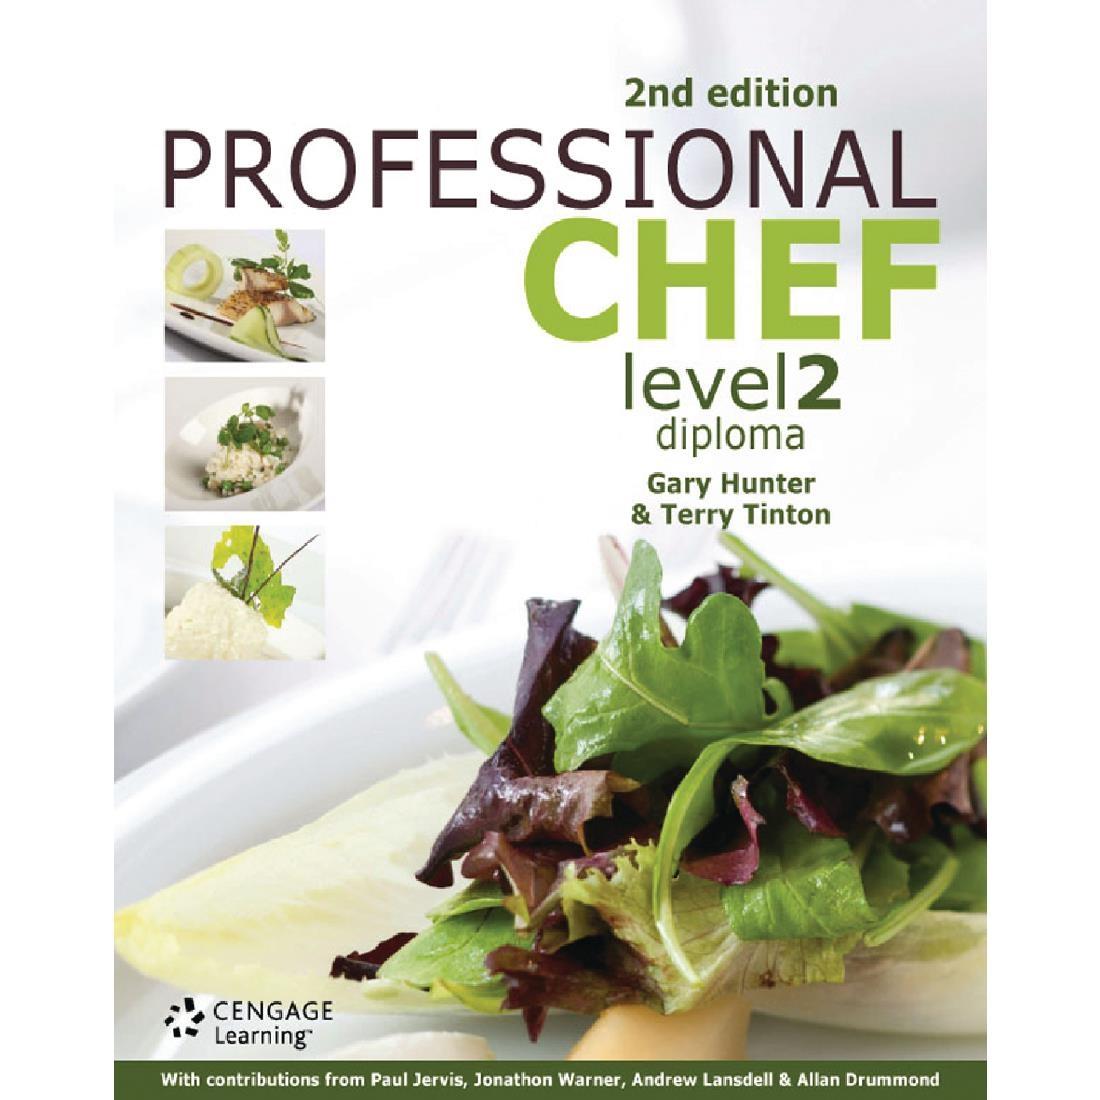 Professional Chef Level 2 Diploma - 2nd edition - 1G0059  - 1